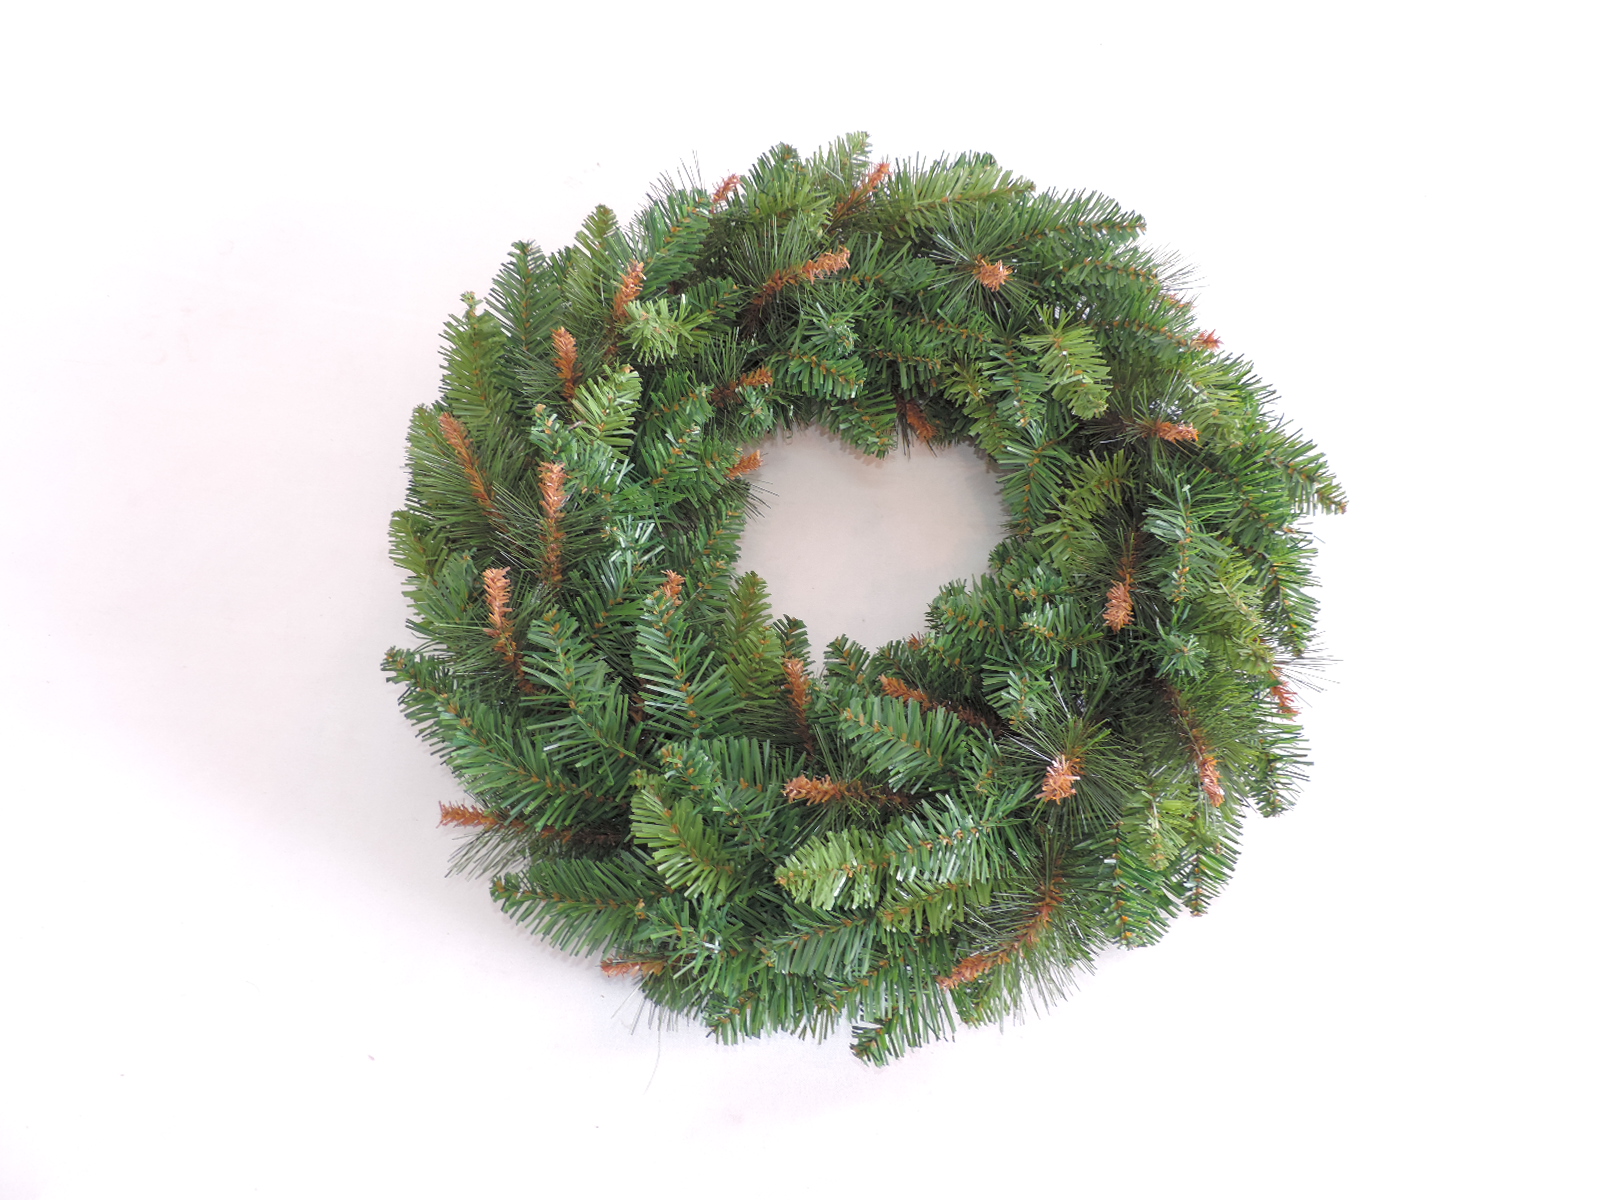 Artificial christmas home wedding decoration gift ornament green wreath /WFP24 Featured Image